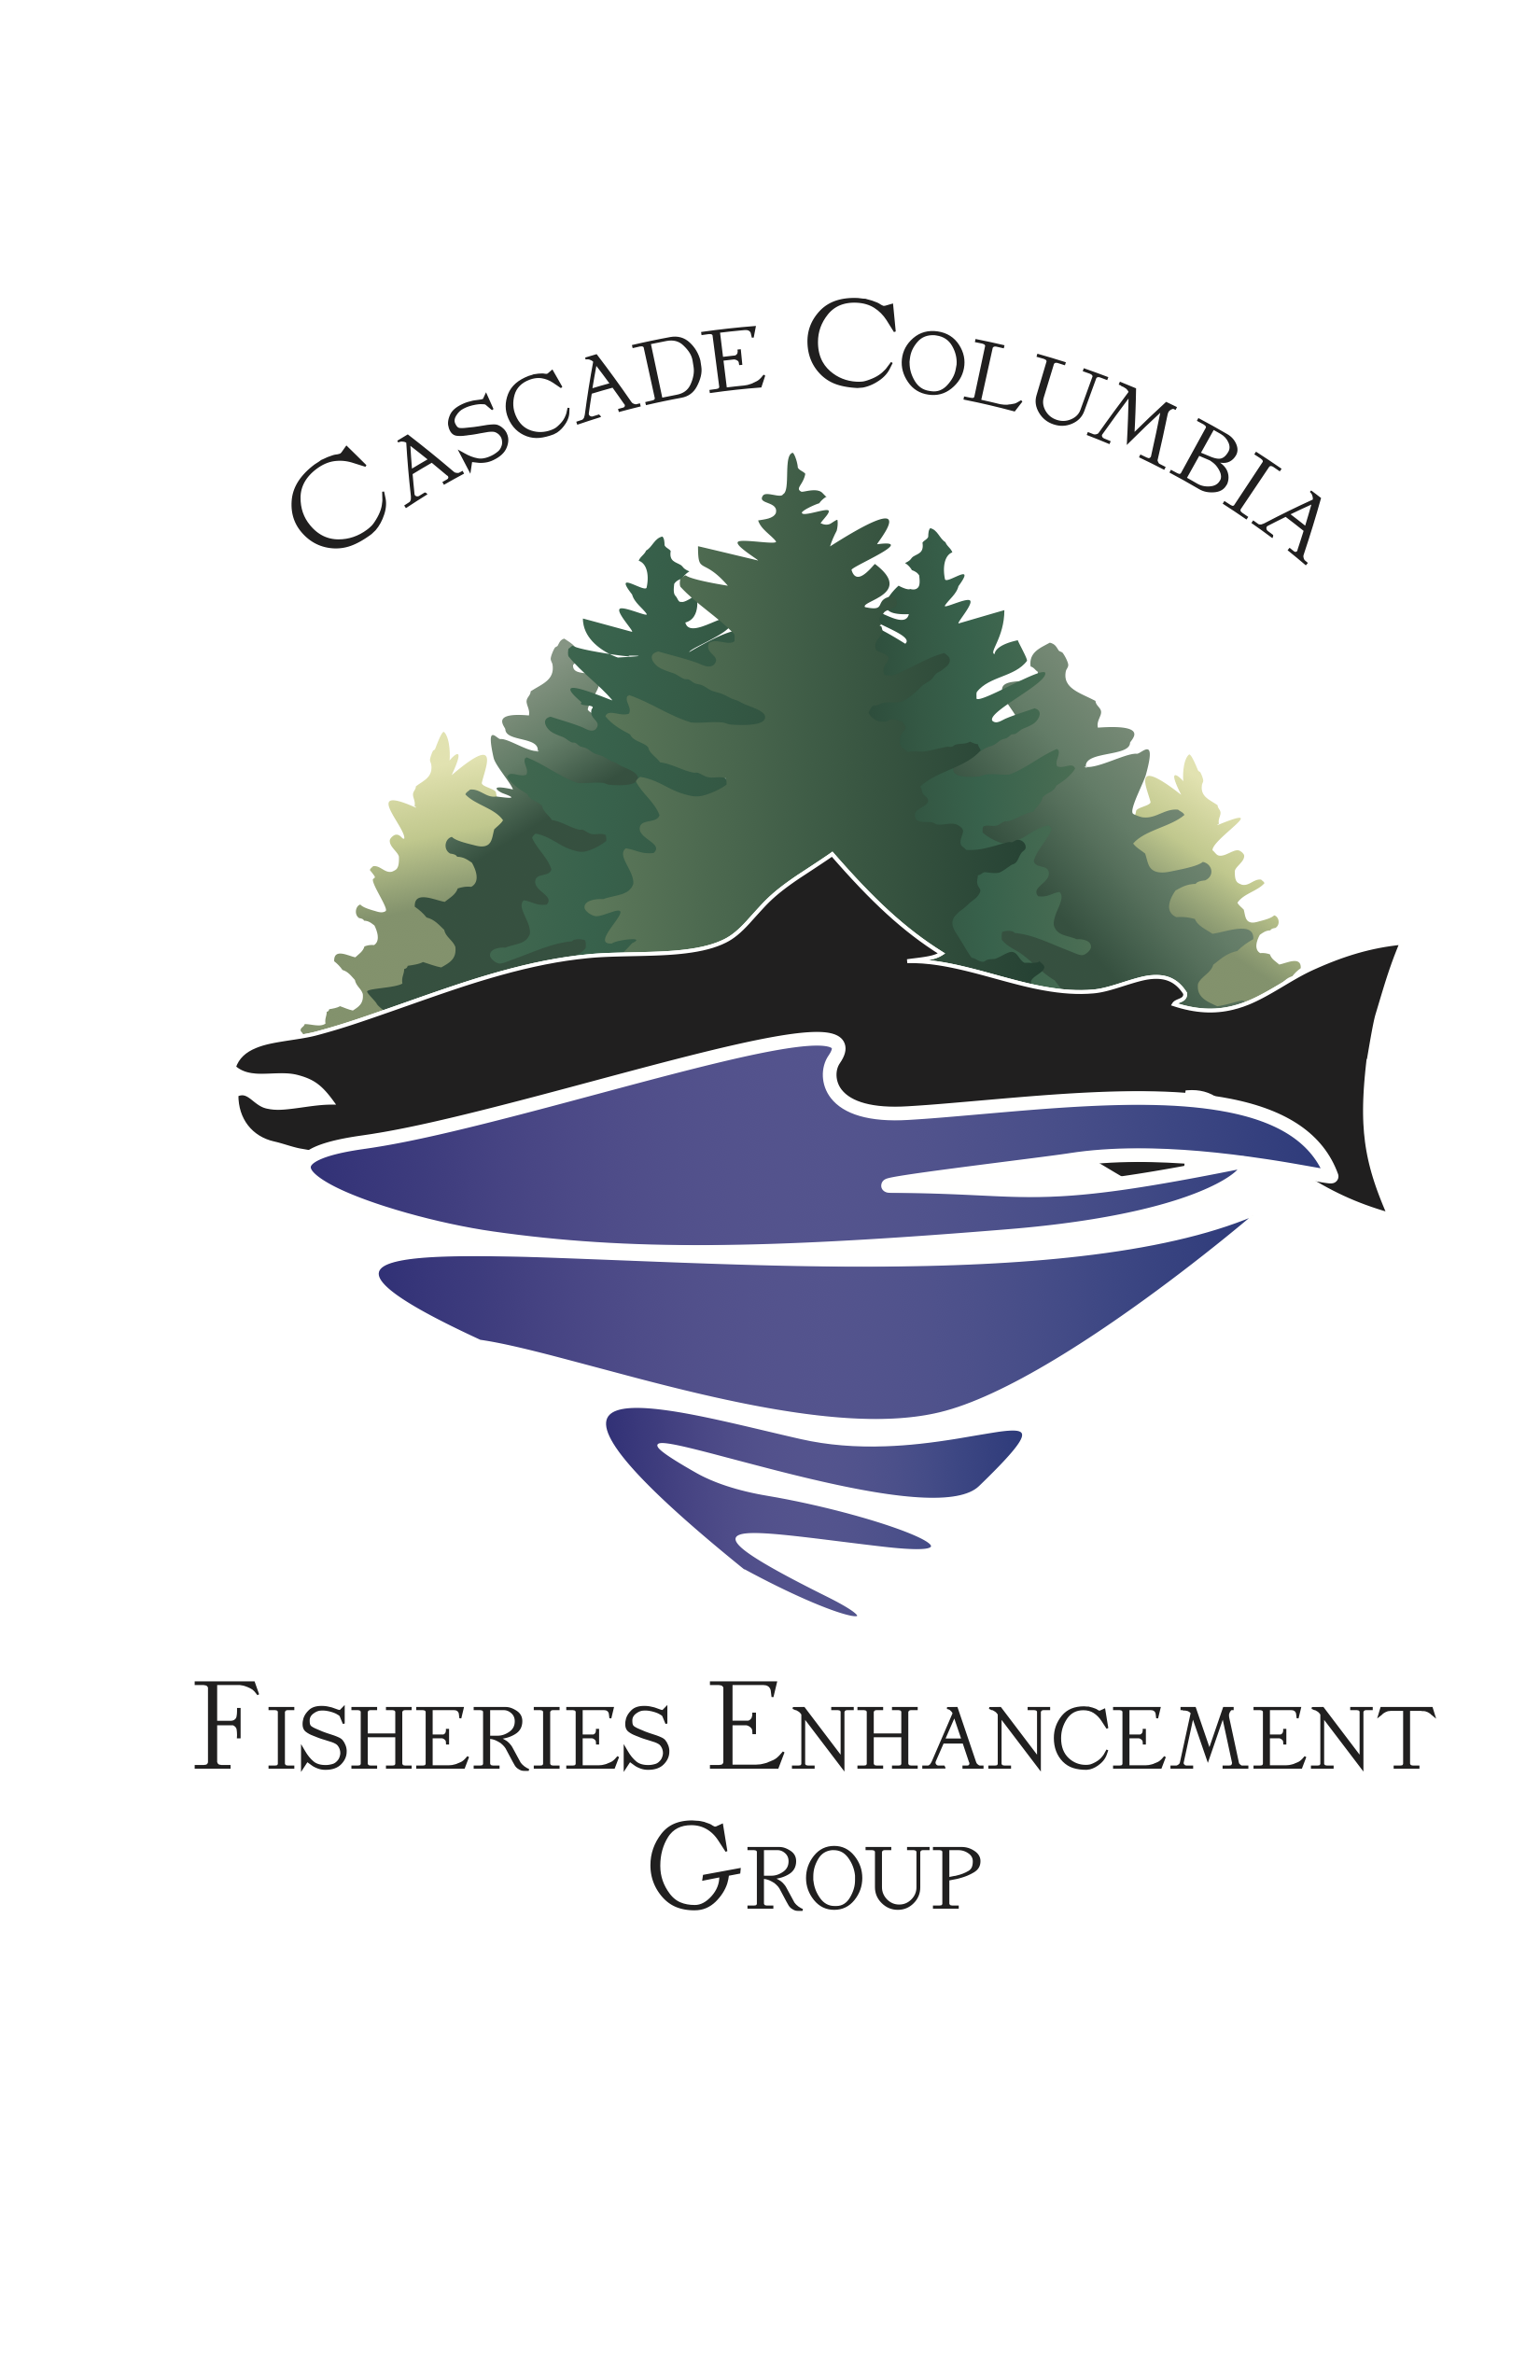 cascade columbia fisheries enhancement group.png